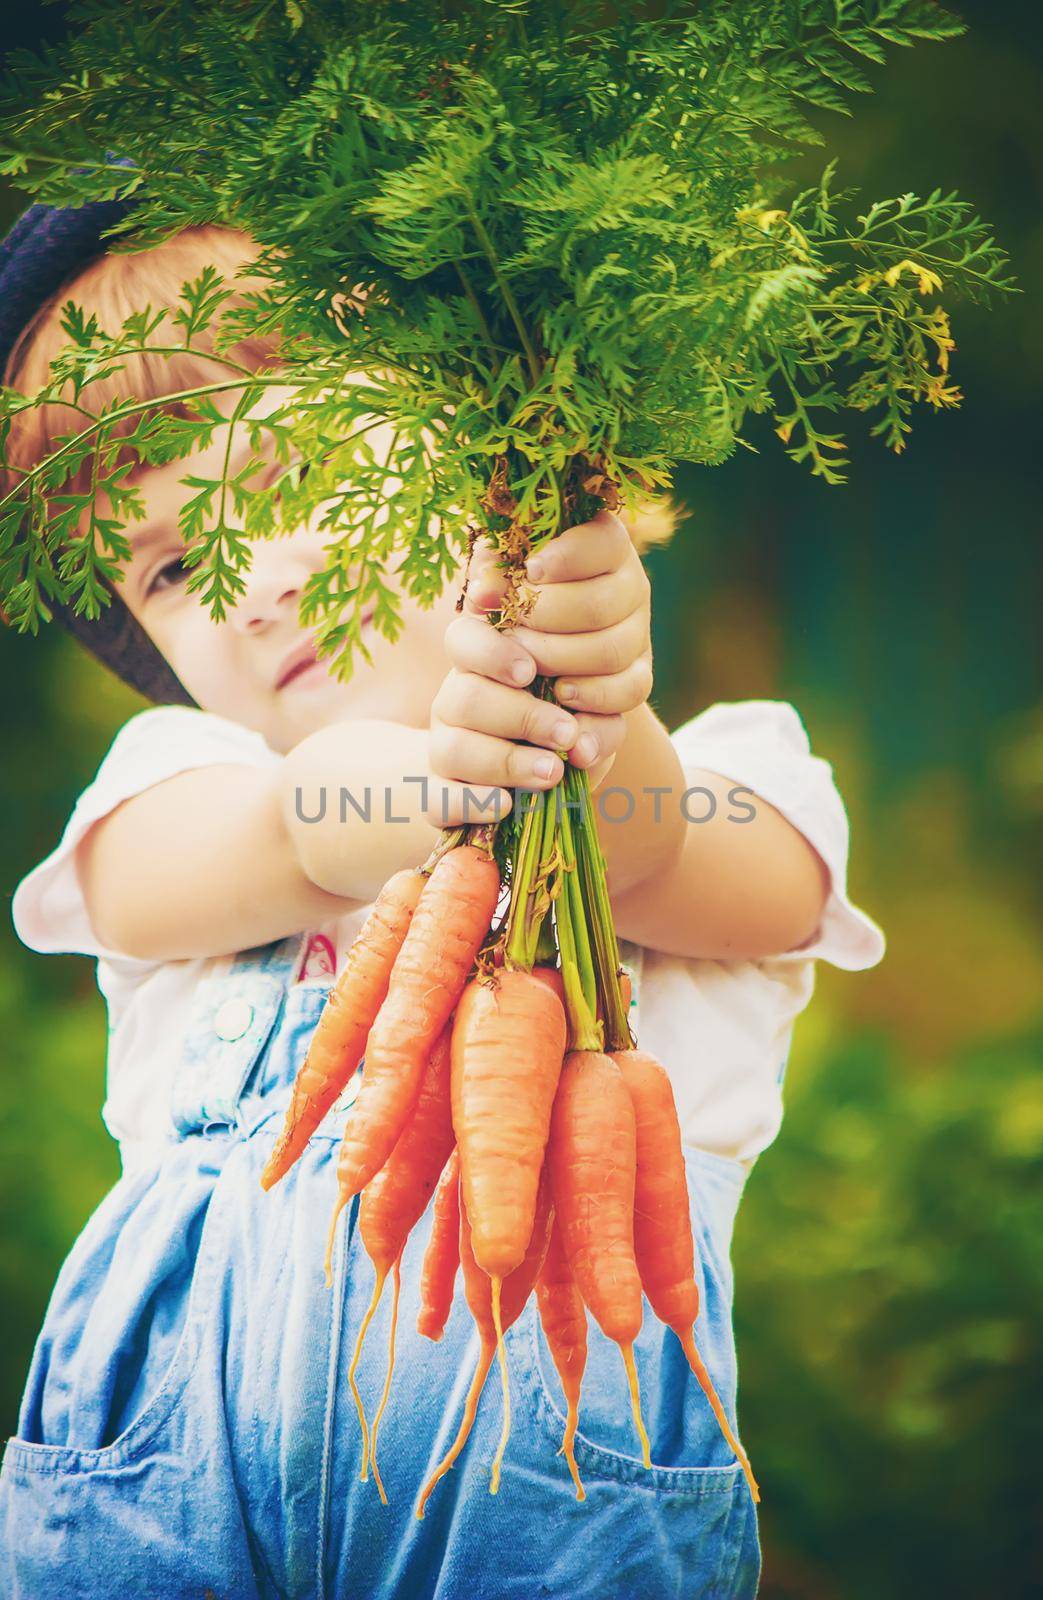 Child and vegetables on the farm. Selective focus. nature.